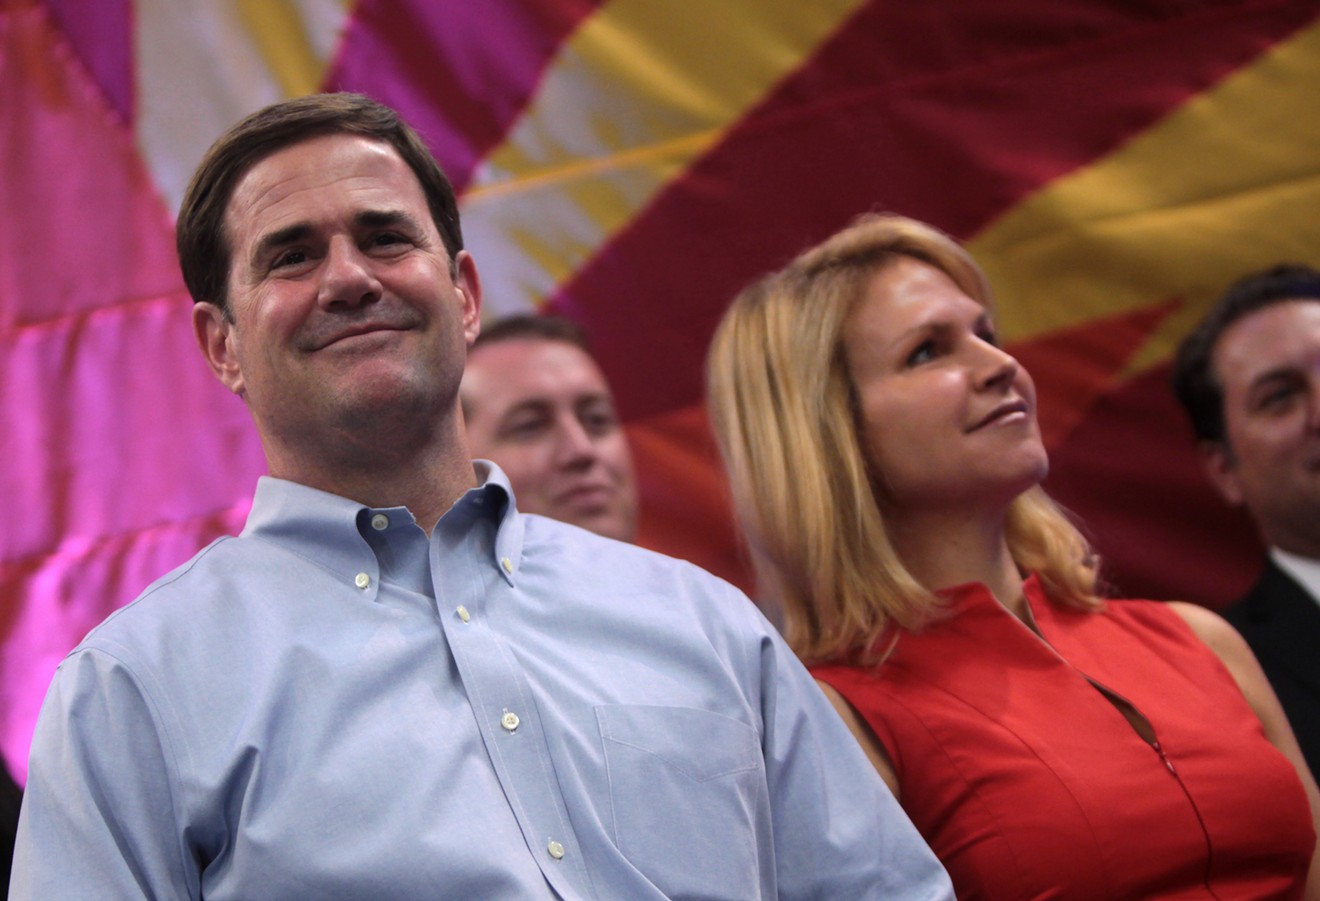 Then-State Treasurer Doug Ducey and Angela Ducey at a 2014 campaign event.